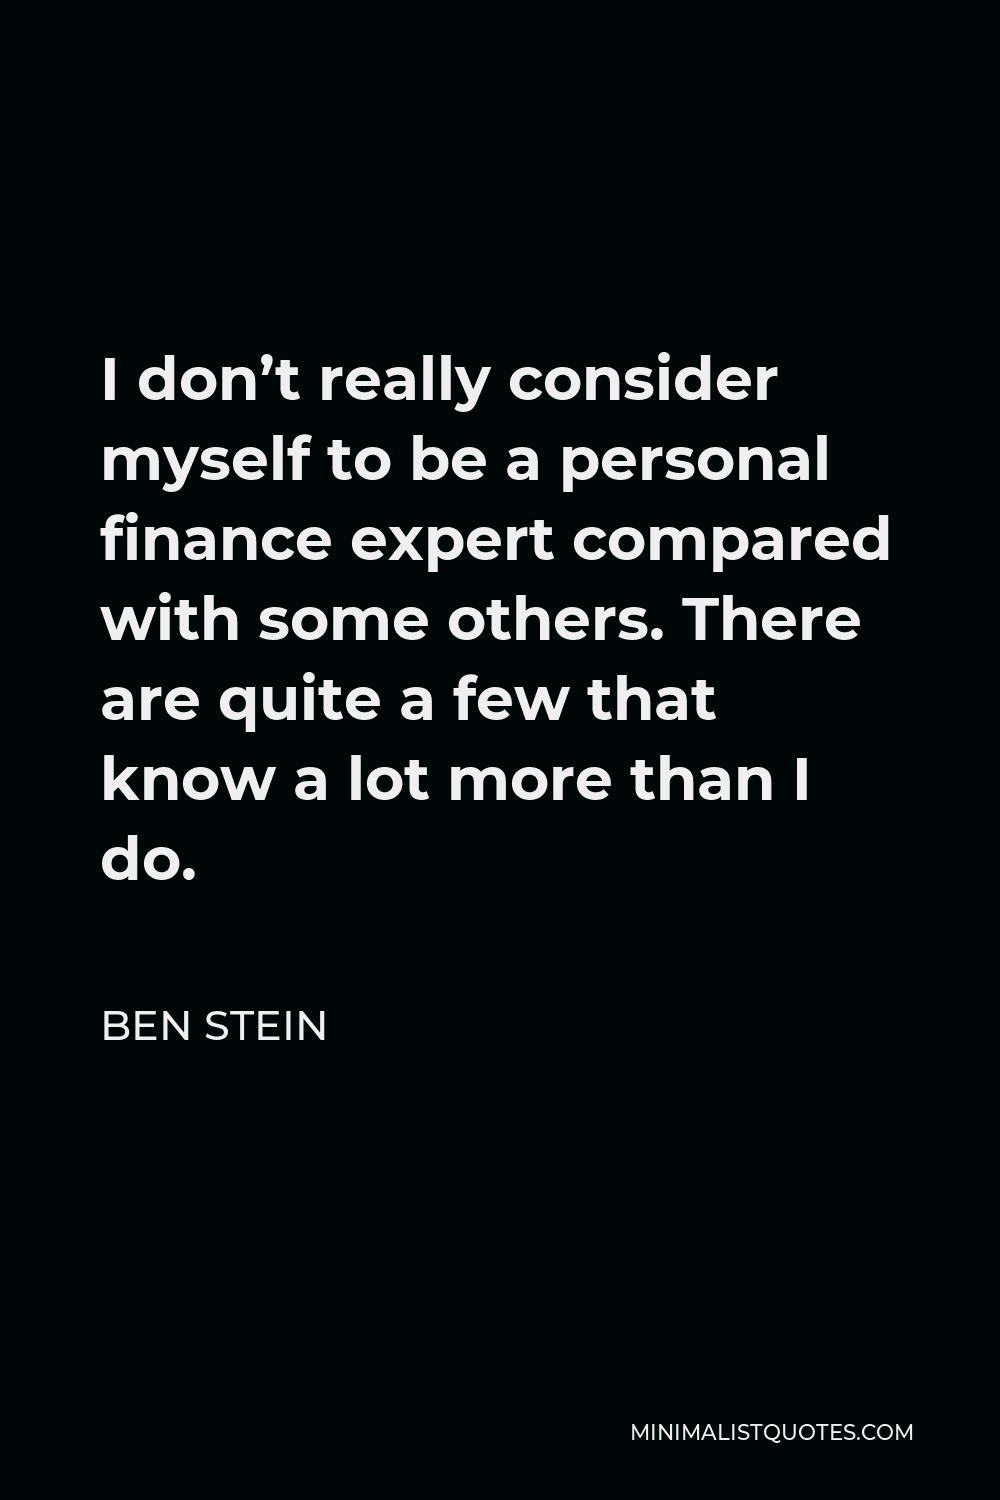 Ben Stein Quote - I don’t really consider myself to be a personal finance expert compared with some others. There are quite a few that know a lot more than I do.